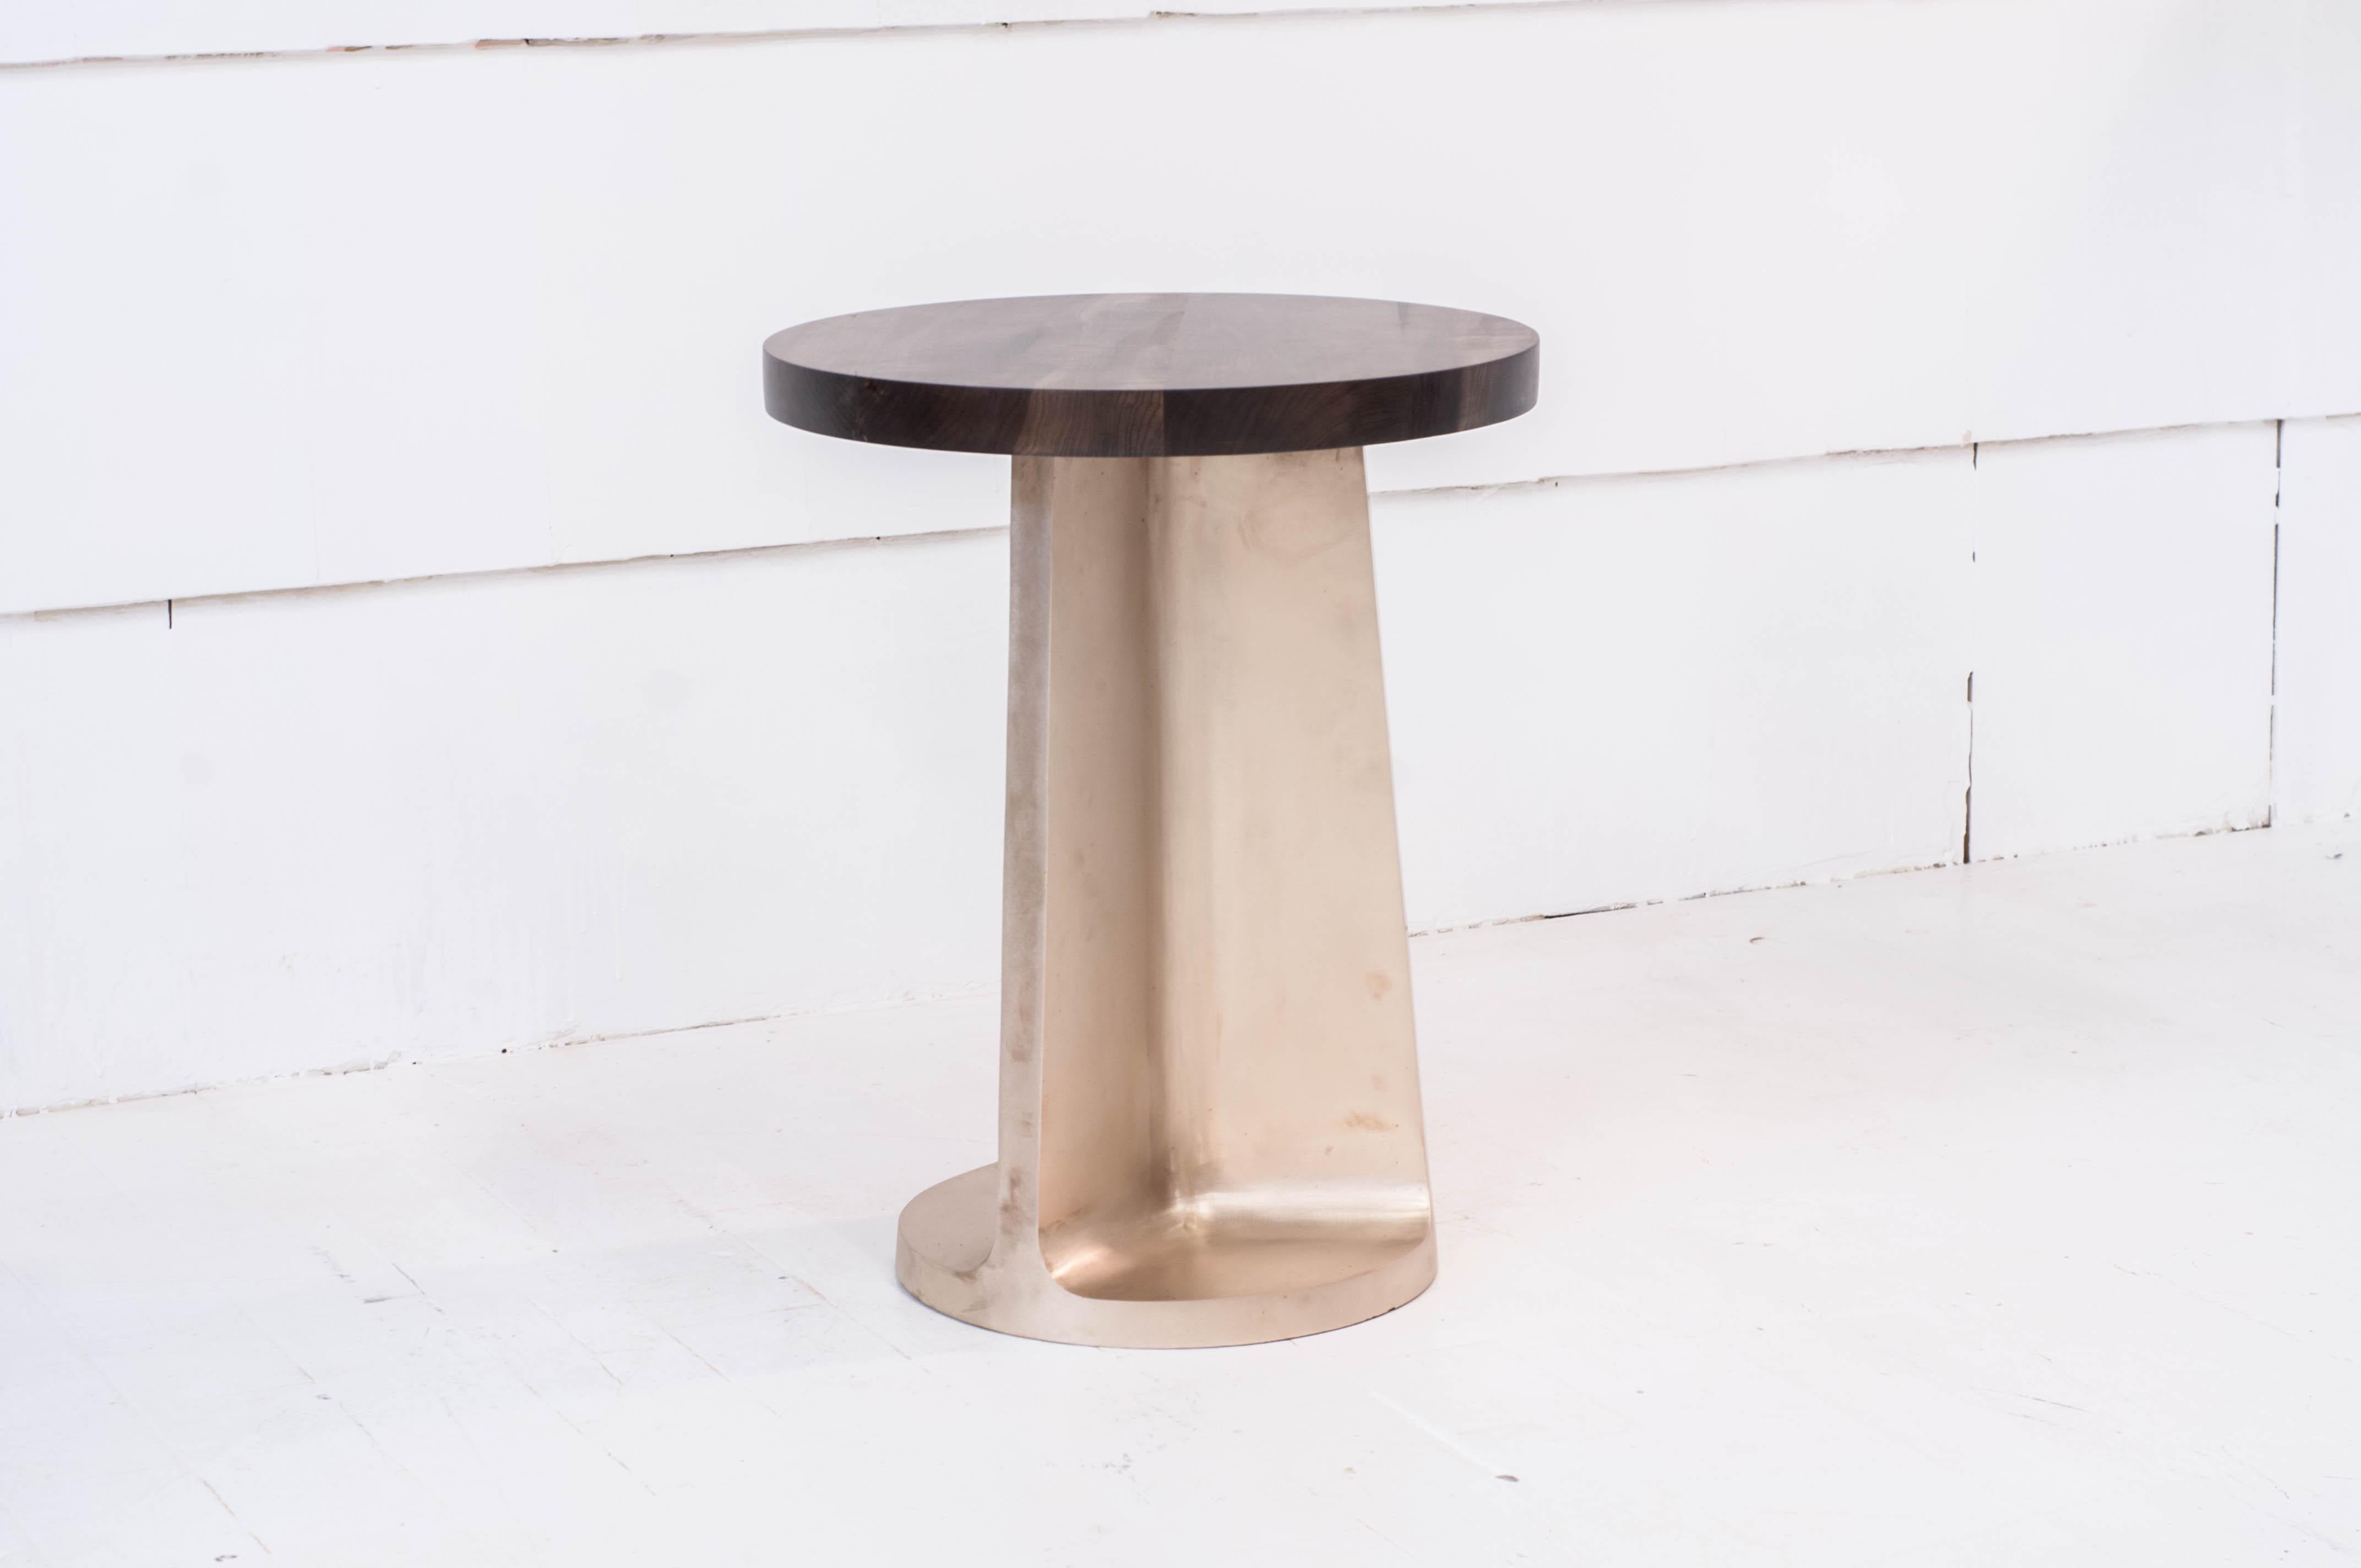 Contemporary Bronze Neolith Cafe Table in Oxidized Maple and Cast Bronze